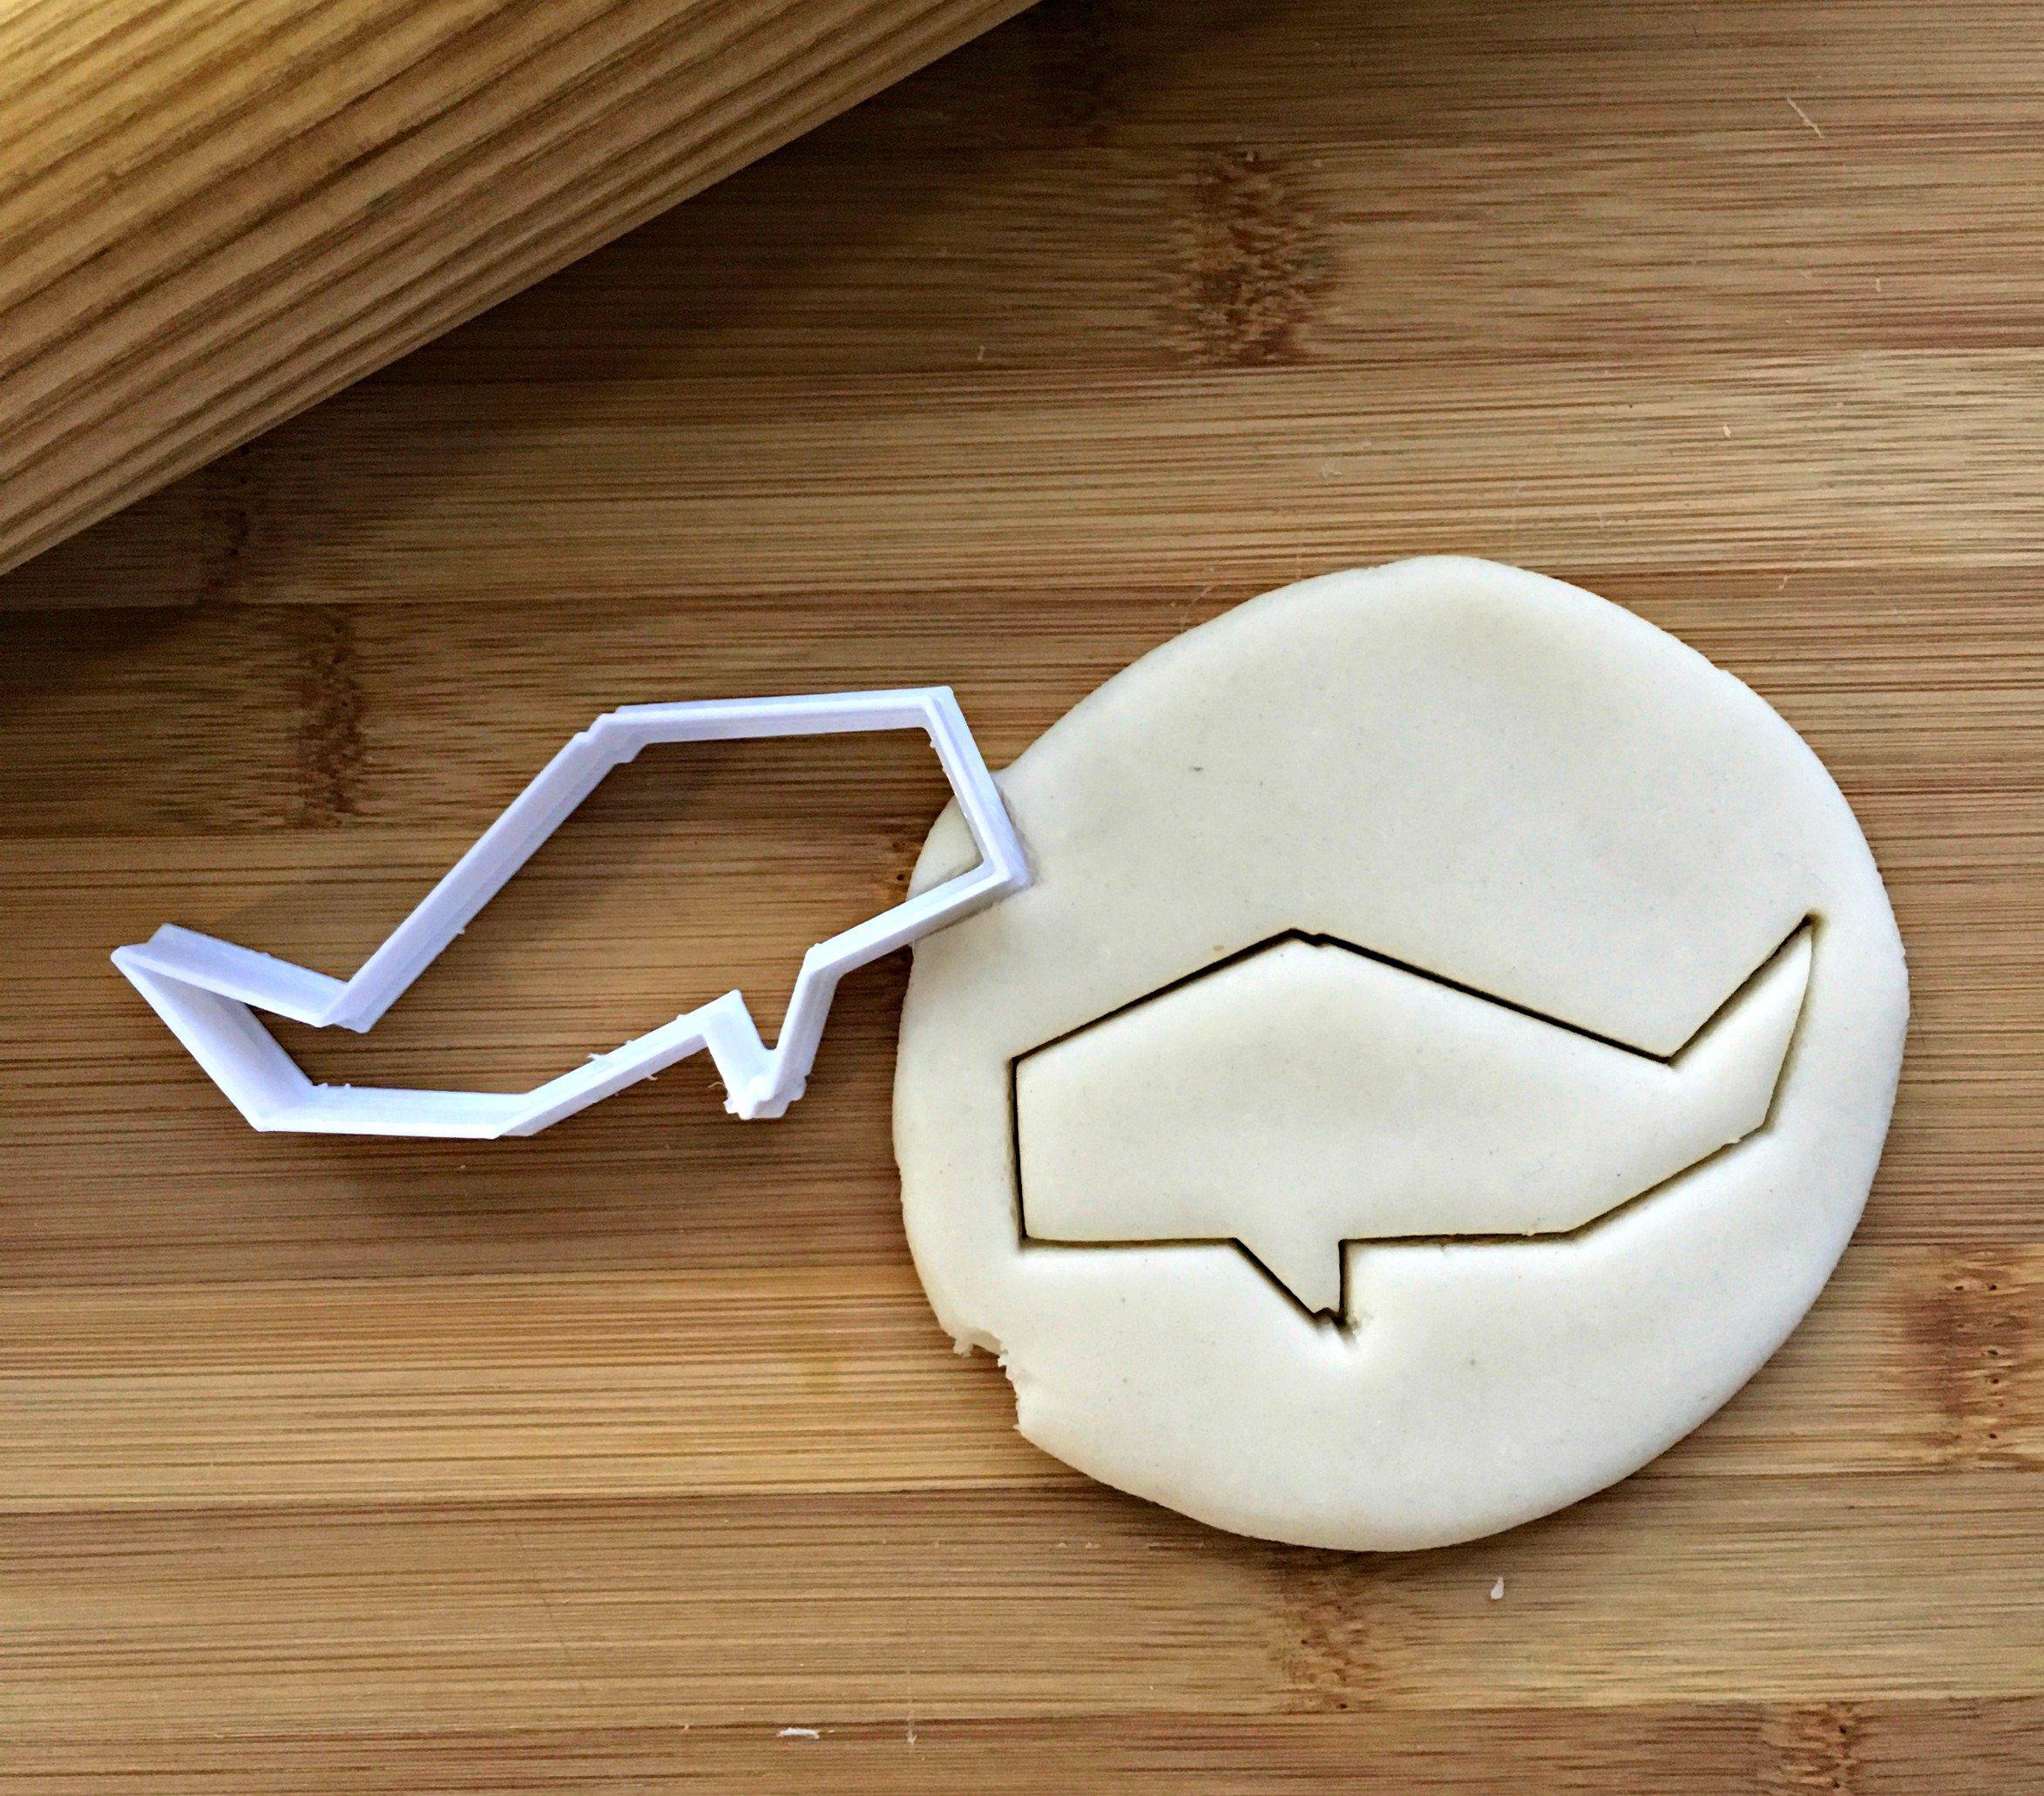 Origami Whale Cookie Cutter/Dishwasher Safe